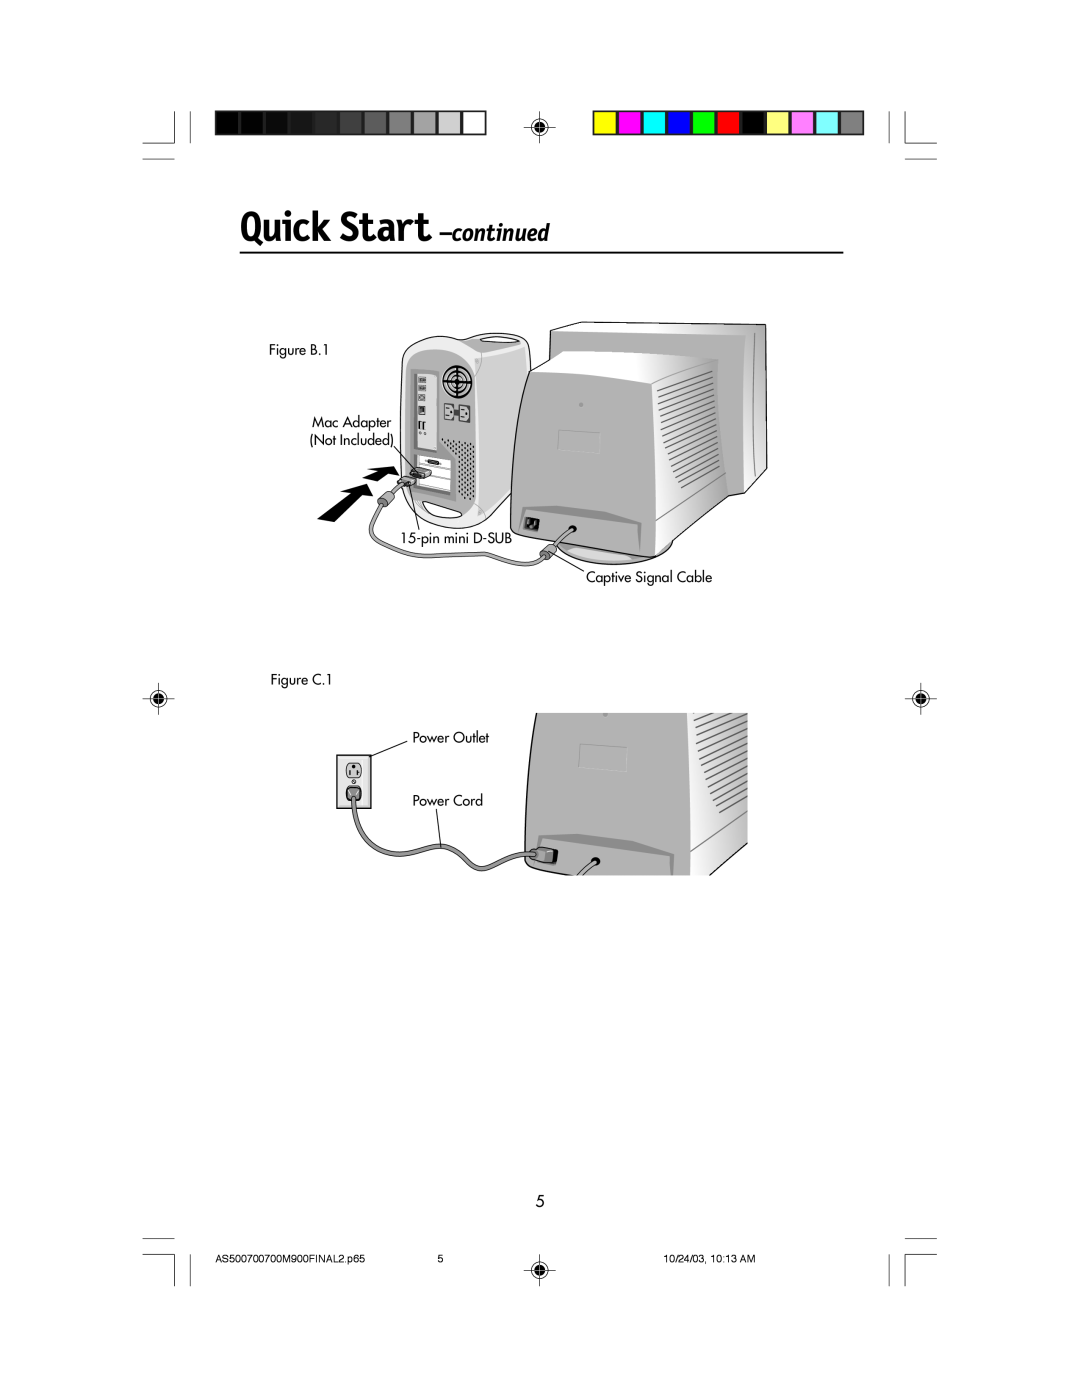 NEC manual Quick Start -continued, Figure B.1 Mac Adapter Not Included 15-pin mini D-SUB, AS500700700M900FINAL2.p65 